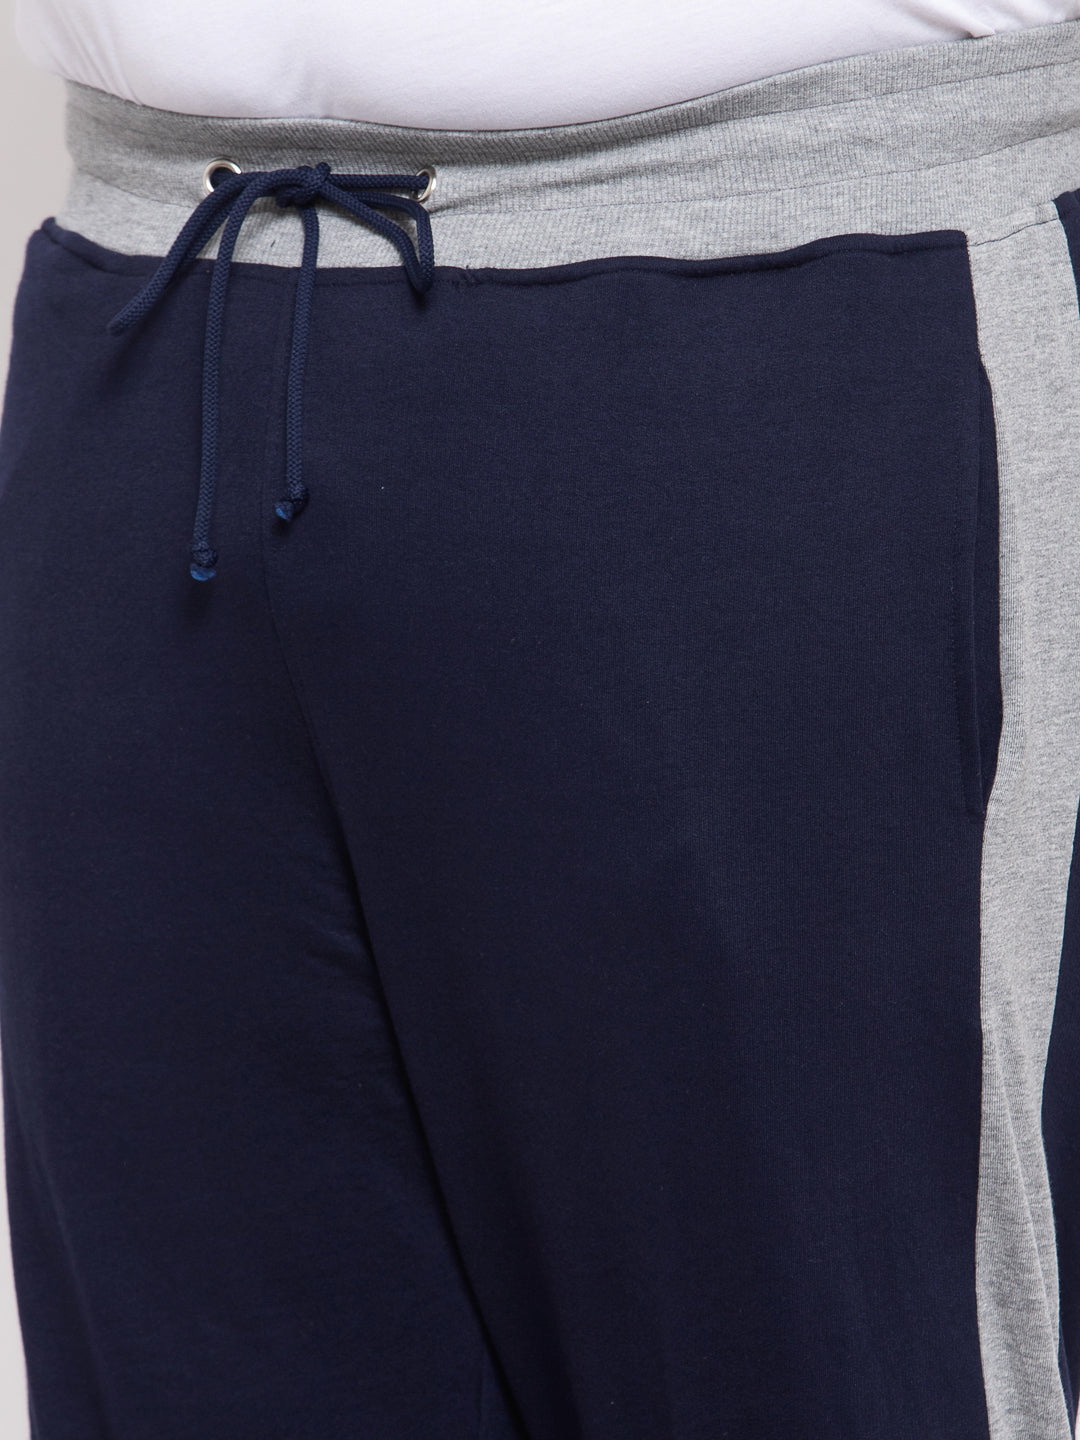 Stay comfortable and stylish with Nike Dri-Fit Knee Length Pants